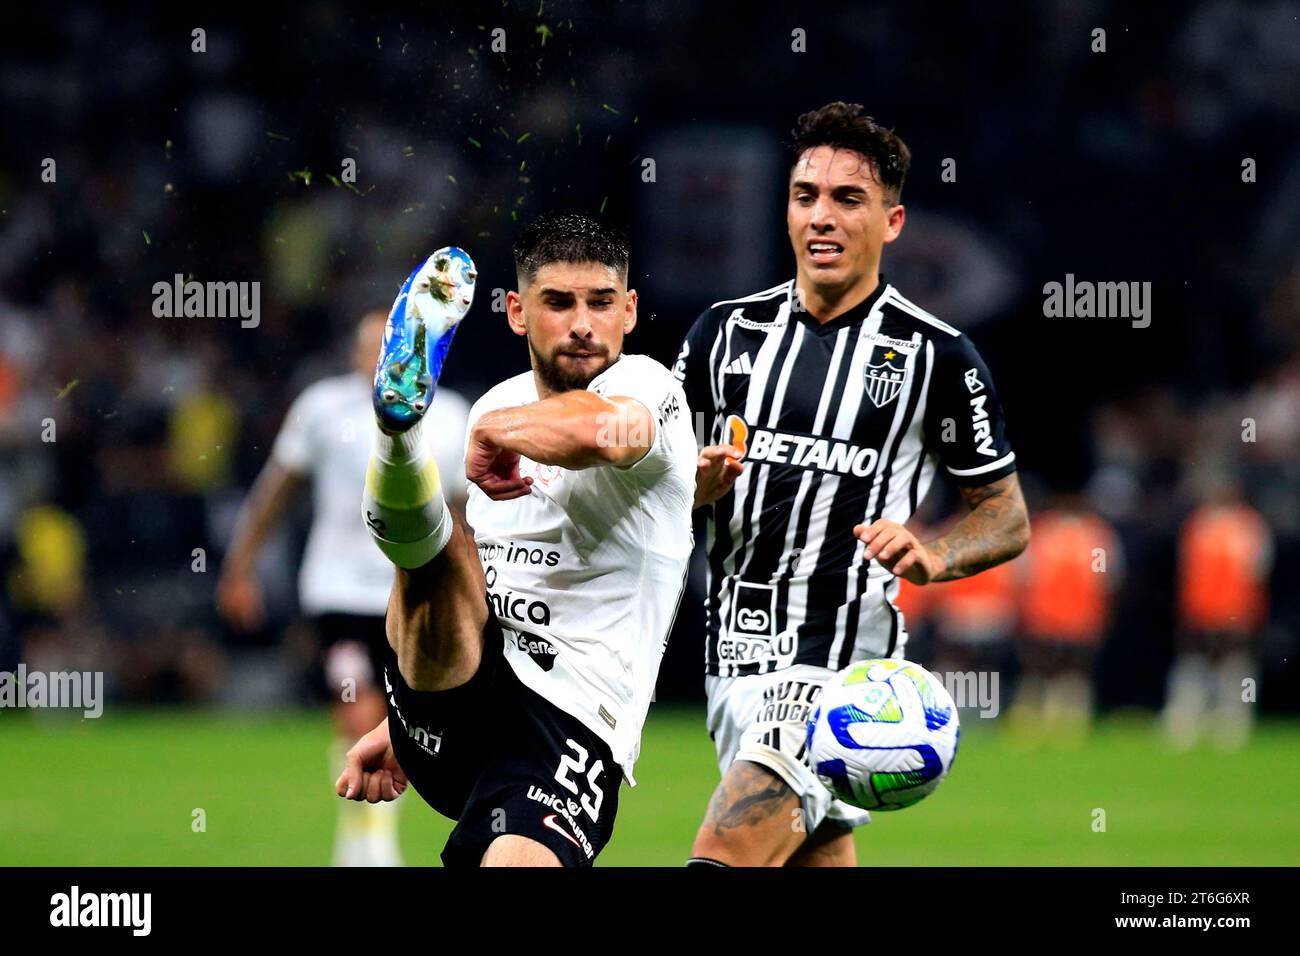 Sao Paulo, Brazil. 10th Nov, 2023. Bruno Mendes during the game between CORINTHIANS X ATLETICO MG at NEO QUIMICA ARENA in Sao Paulo, Brazil (Fernando Roberto/SPP) Credit: SPP Sport Press Photo. /Alamy Live News Stock Photo